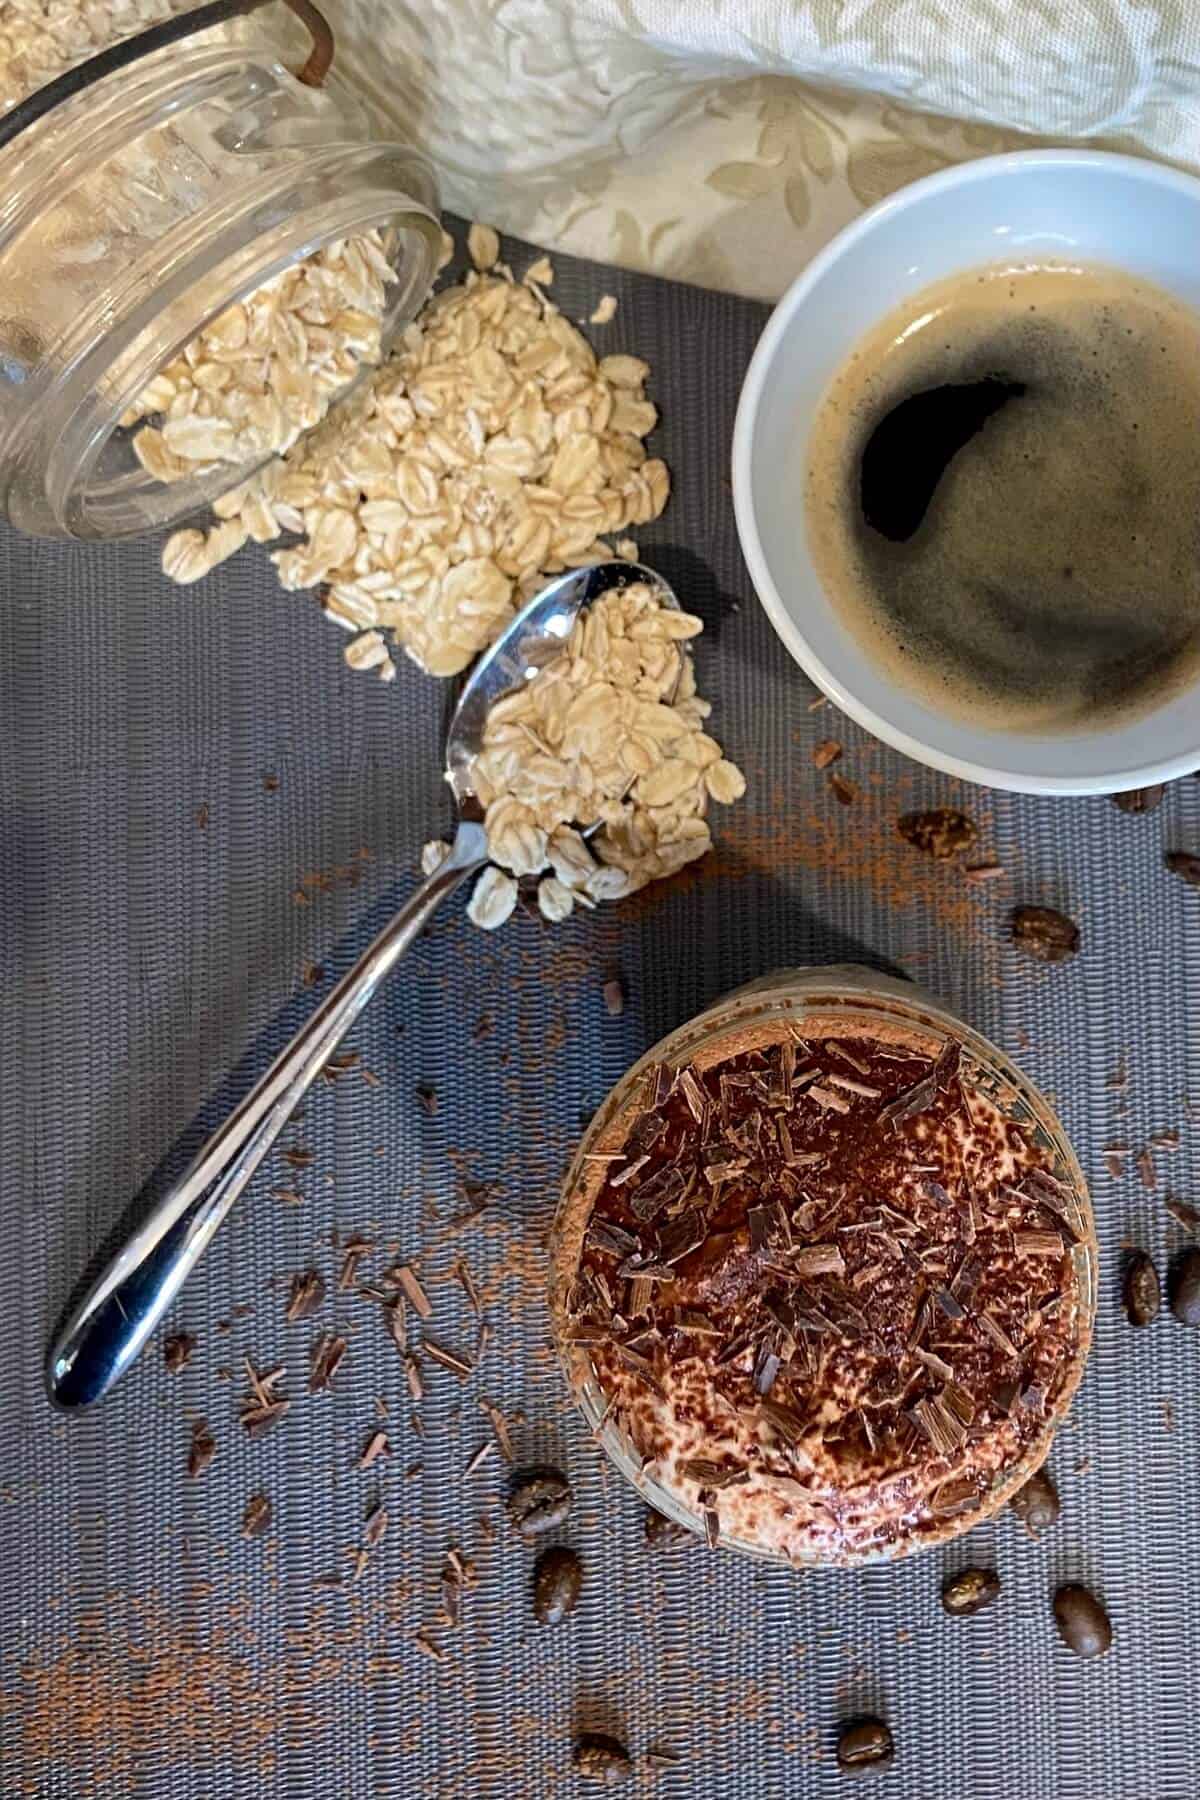 A jar of oats spilled onto a table with a cup of coffee and the overnight oats.